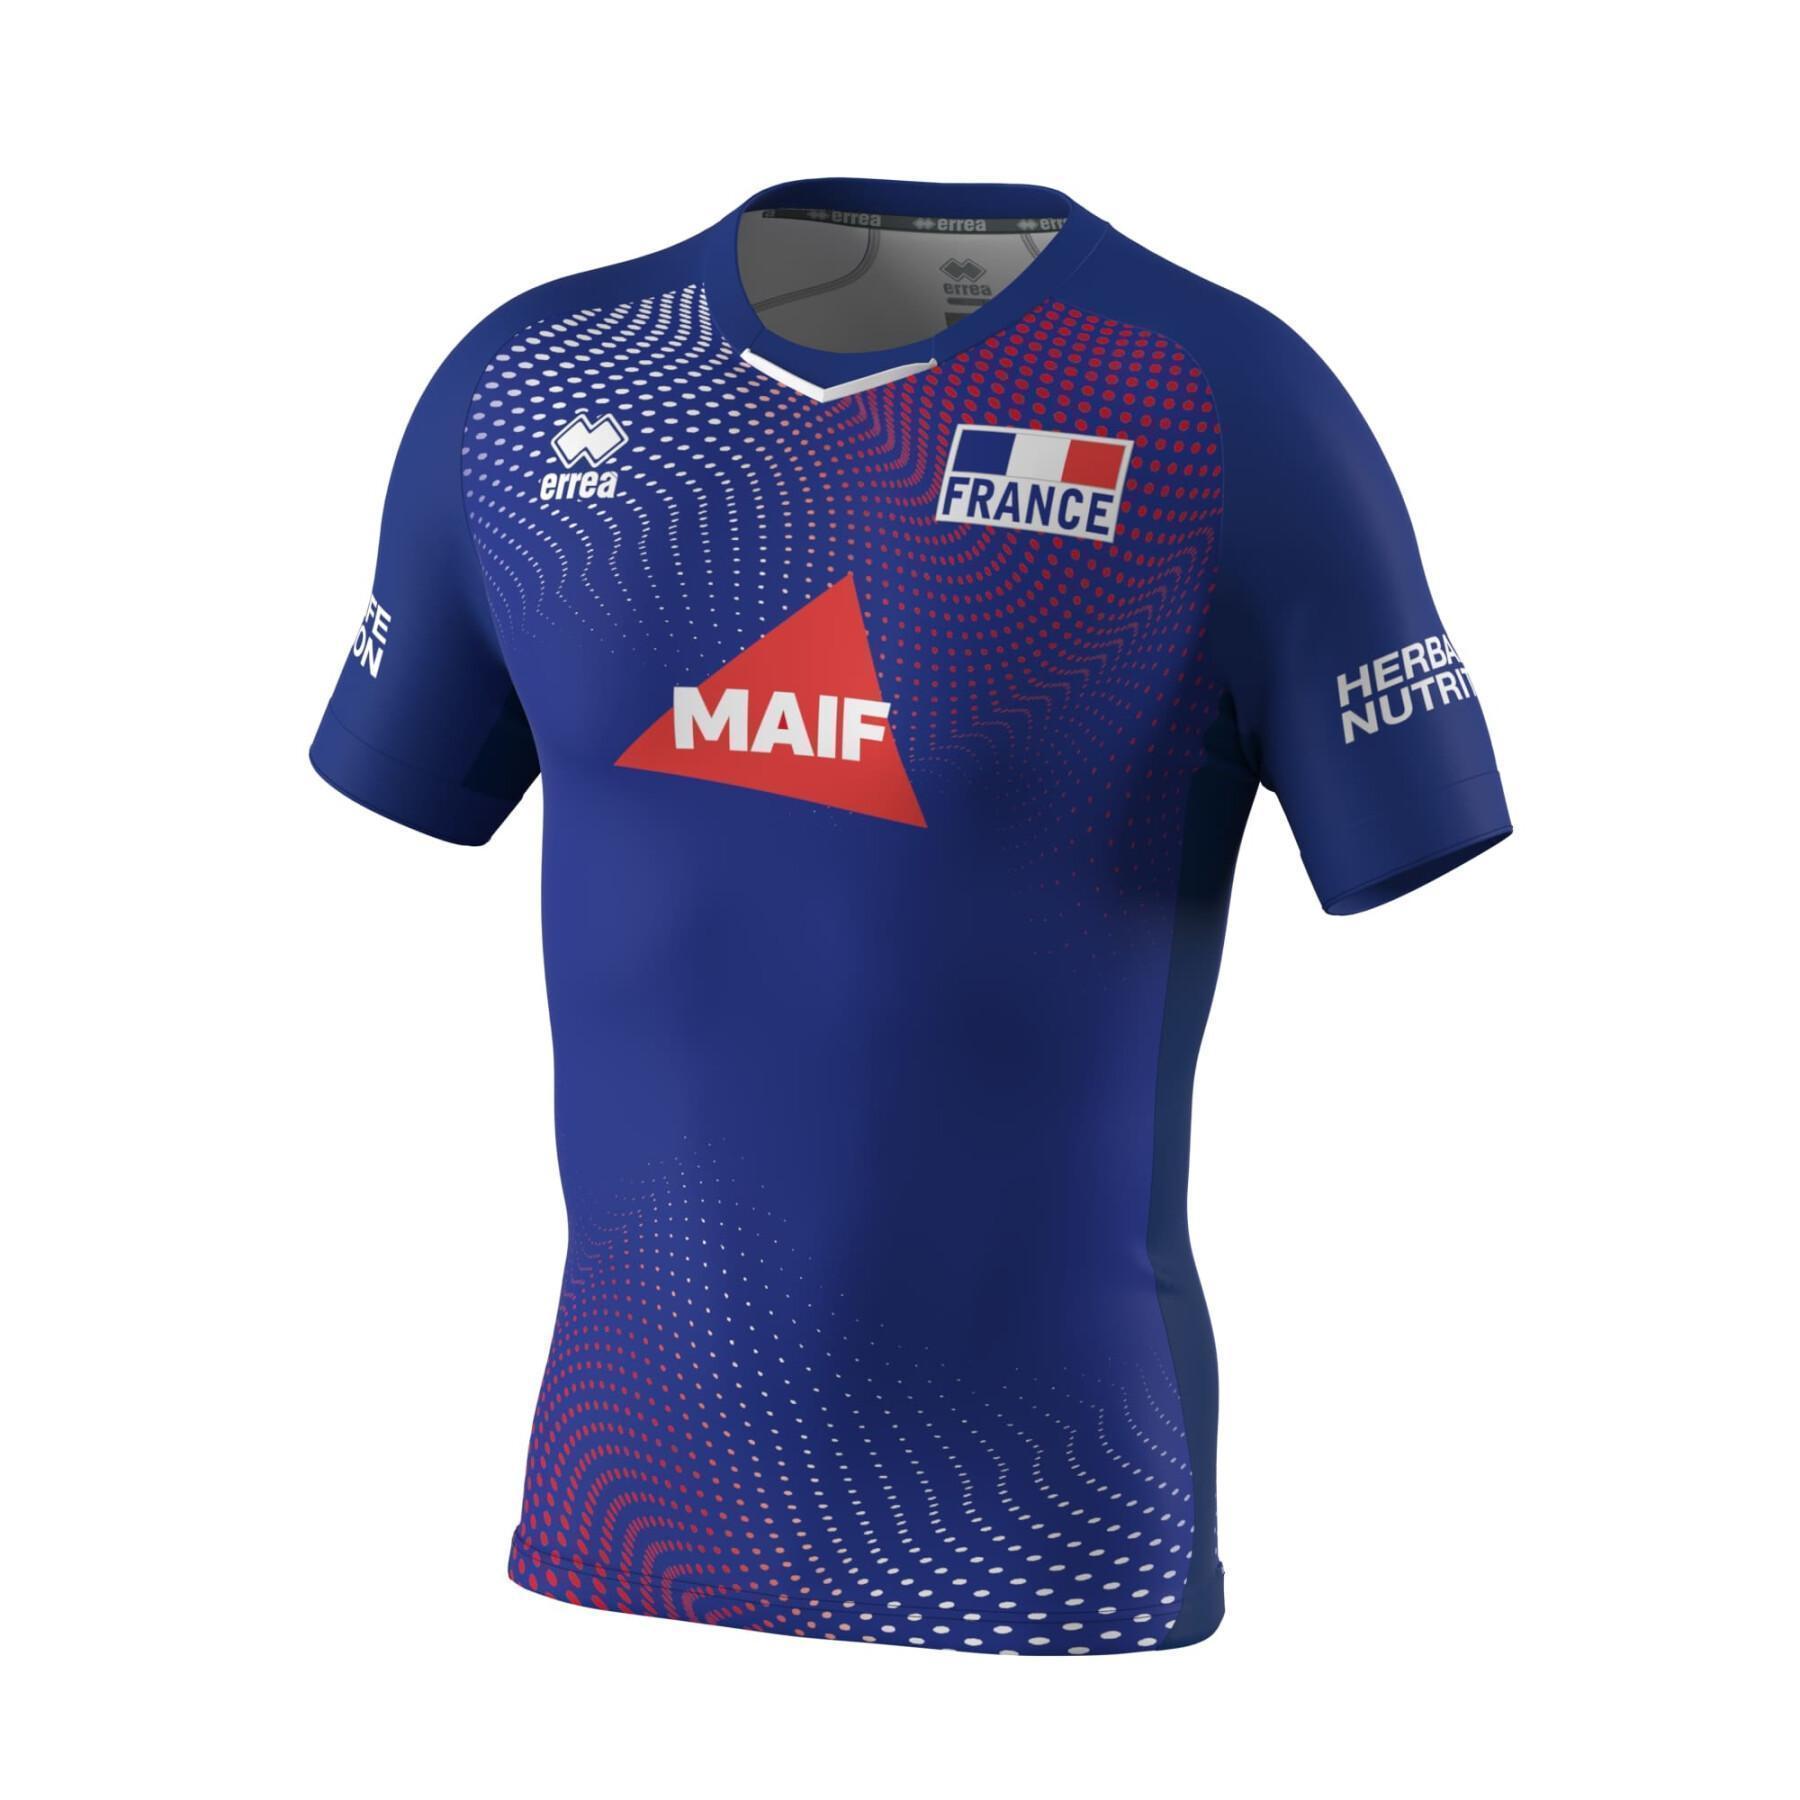 Home jersey of France 2020